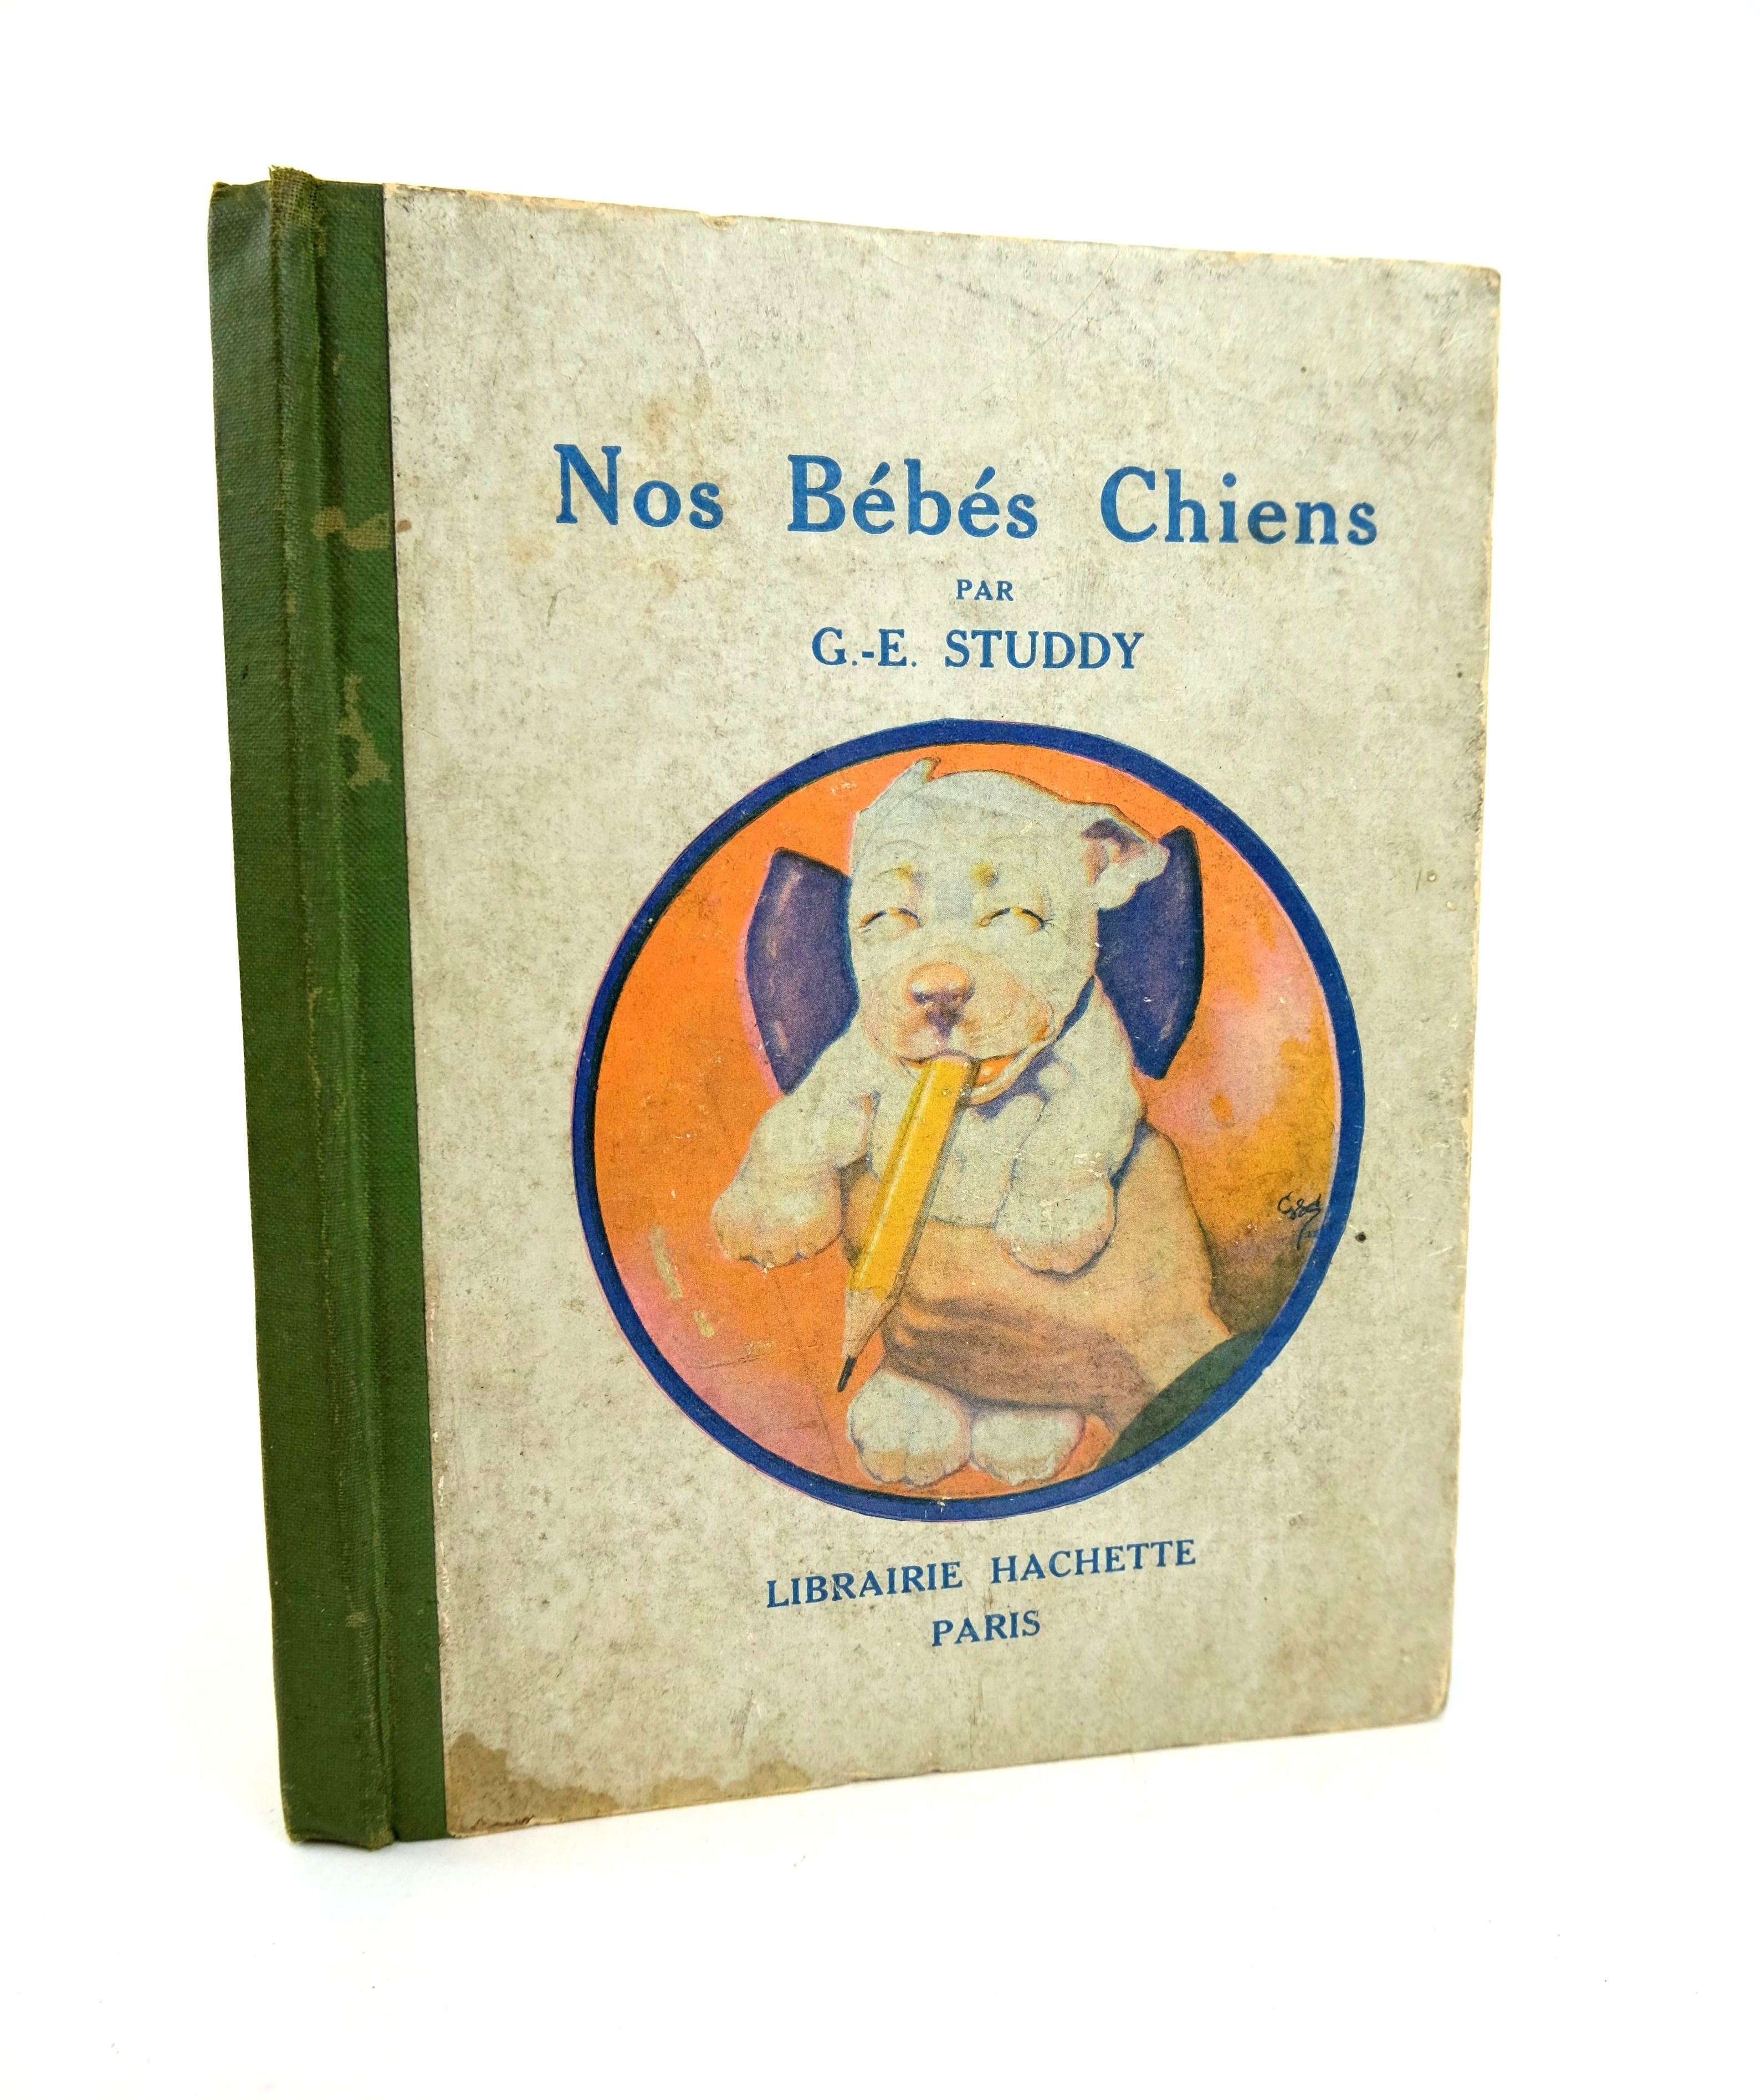 Photo of NOS BEBES CHIENS written by Ostroga, Yvonne illustrated by Studdy, G.E. published by Librairie Hachette (STOCK CODE: 1318634)  for sale by Stella & Rose's Books